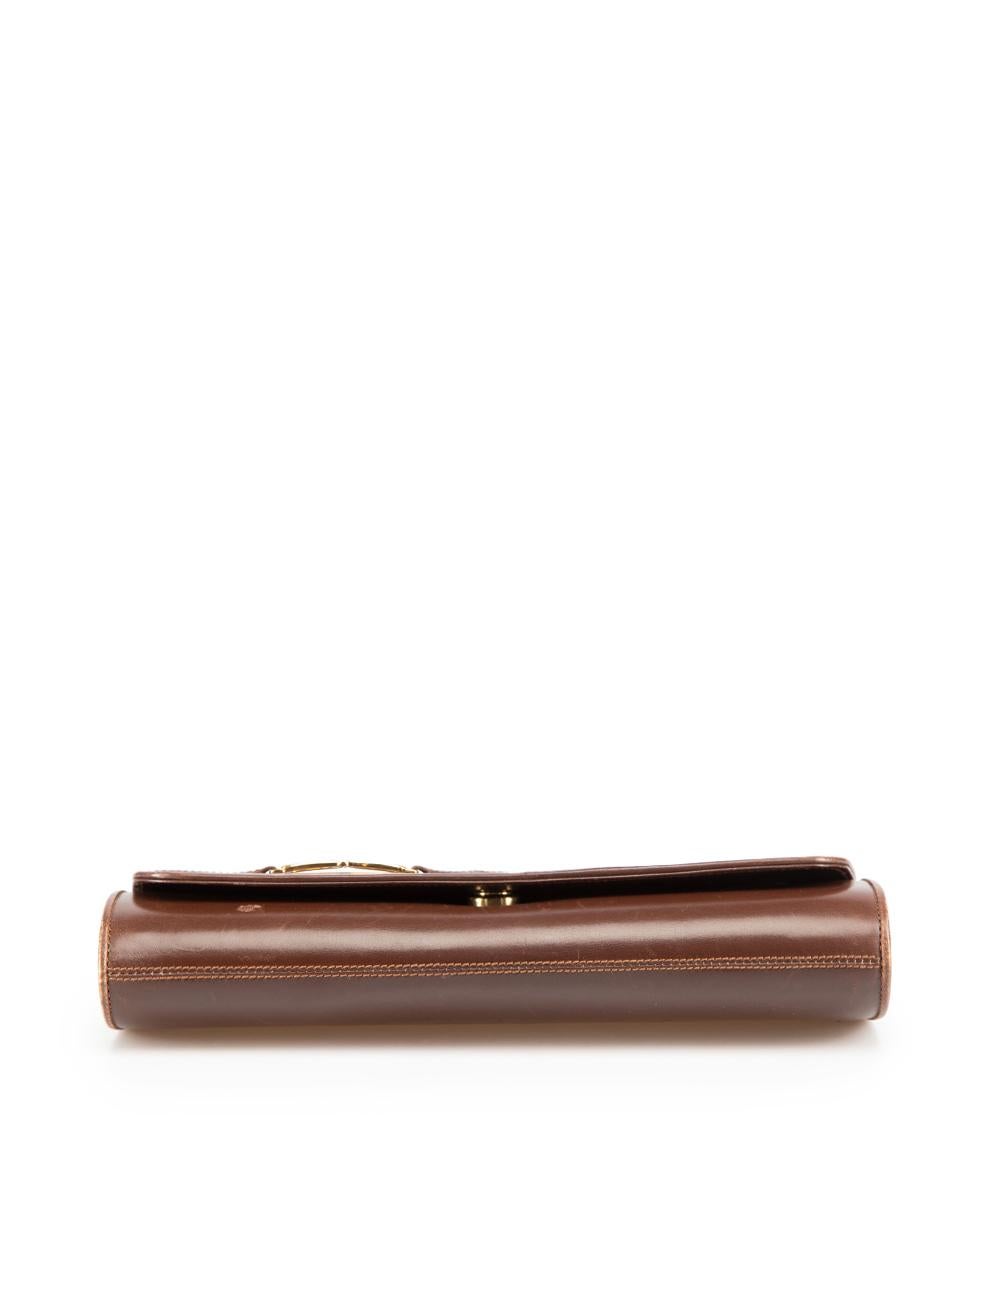 Women's Gucci Vintage Brown Leather Clutch